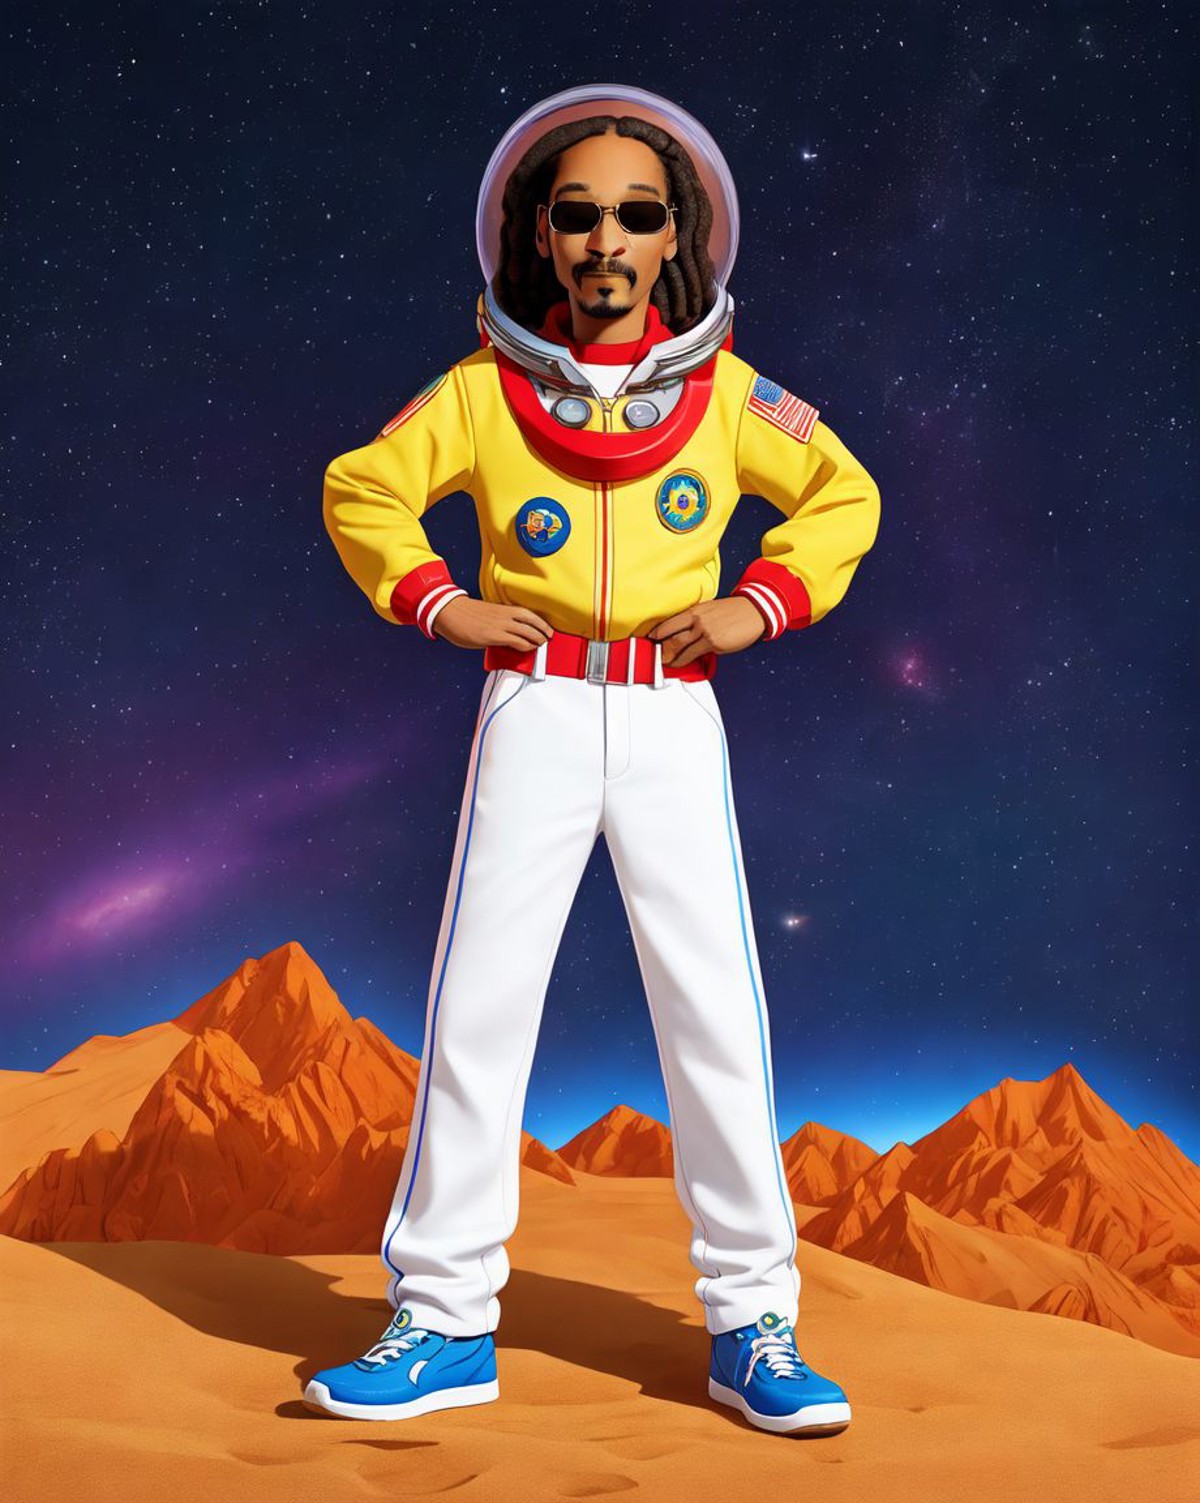 00009-20230531092042-556-The exotic life of snoop-dog as a space explorer, Very detailed, clean, high quality, sharp image.jpg